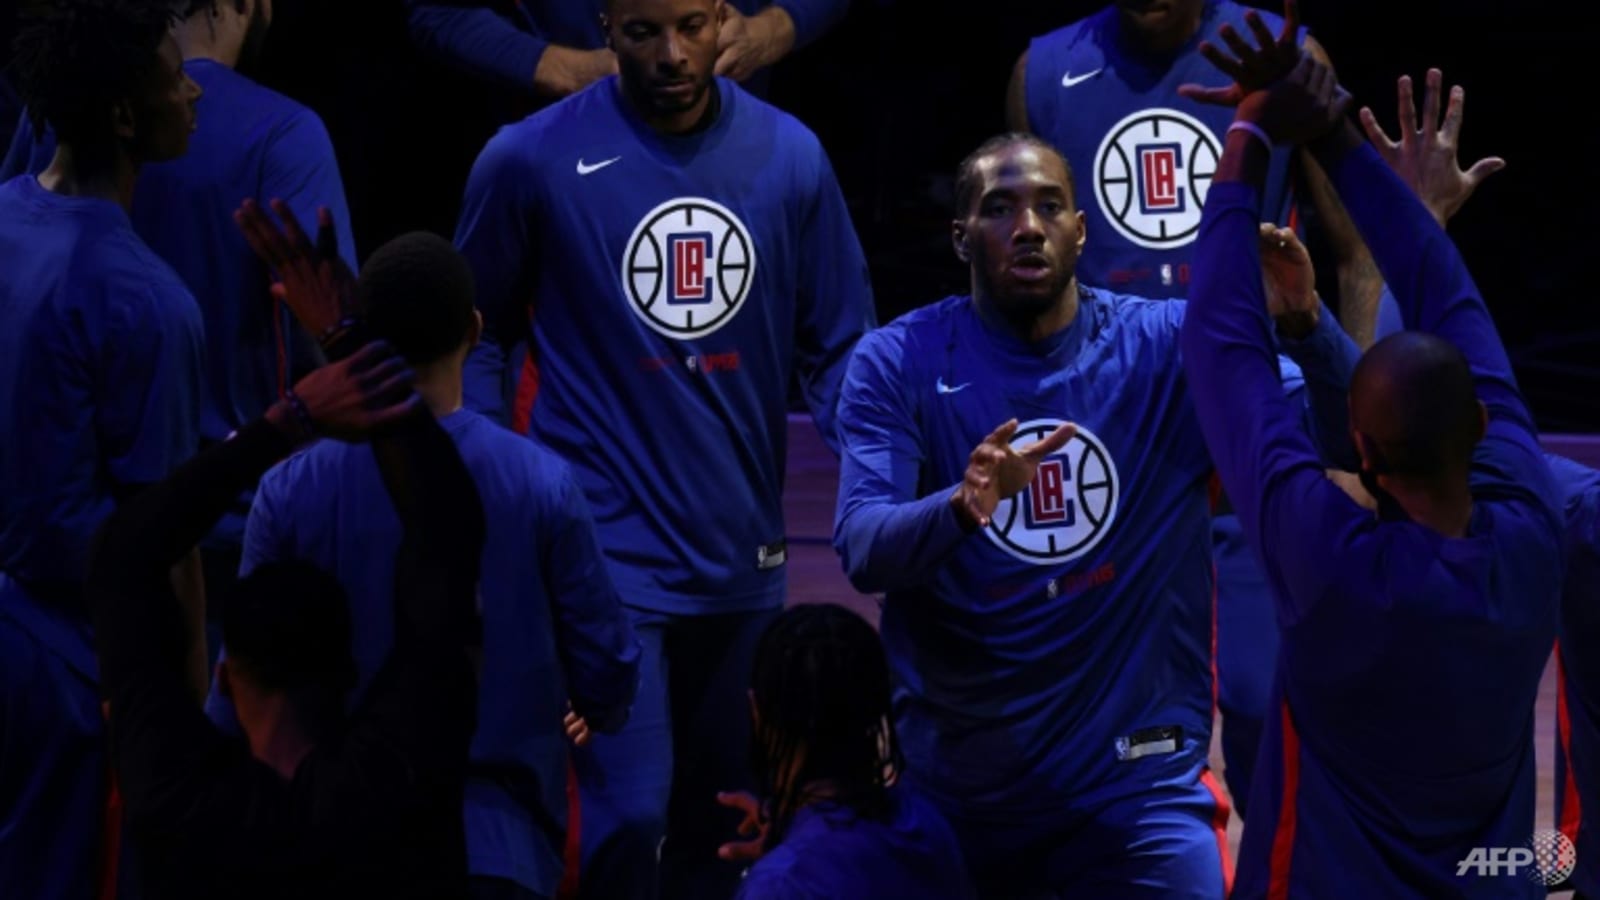 clippers-down-trail-blazers-to-close-in-on-nba-playoff-berth